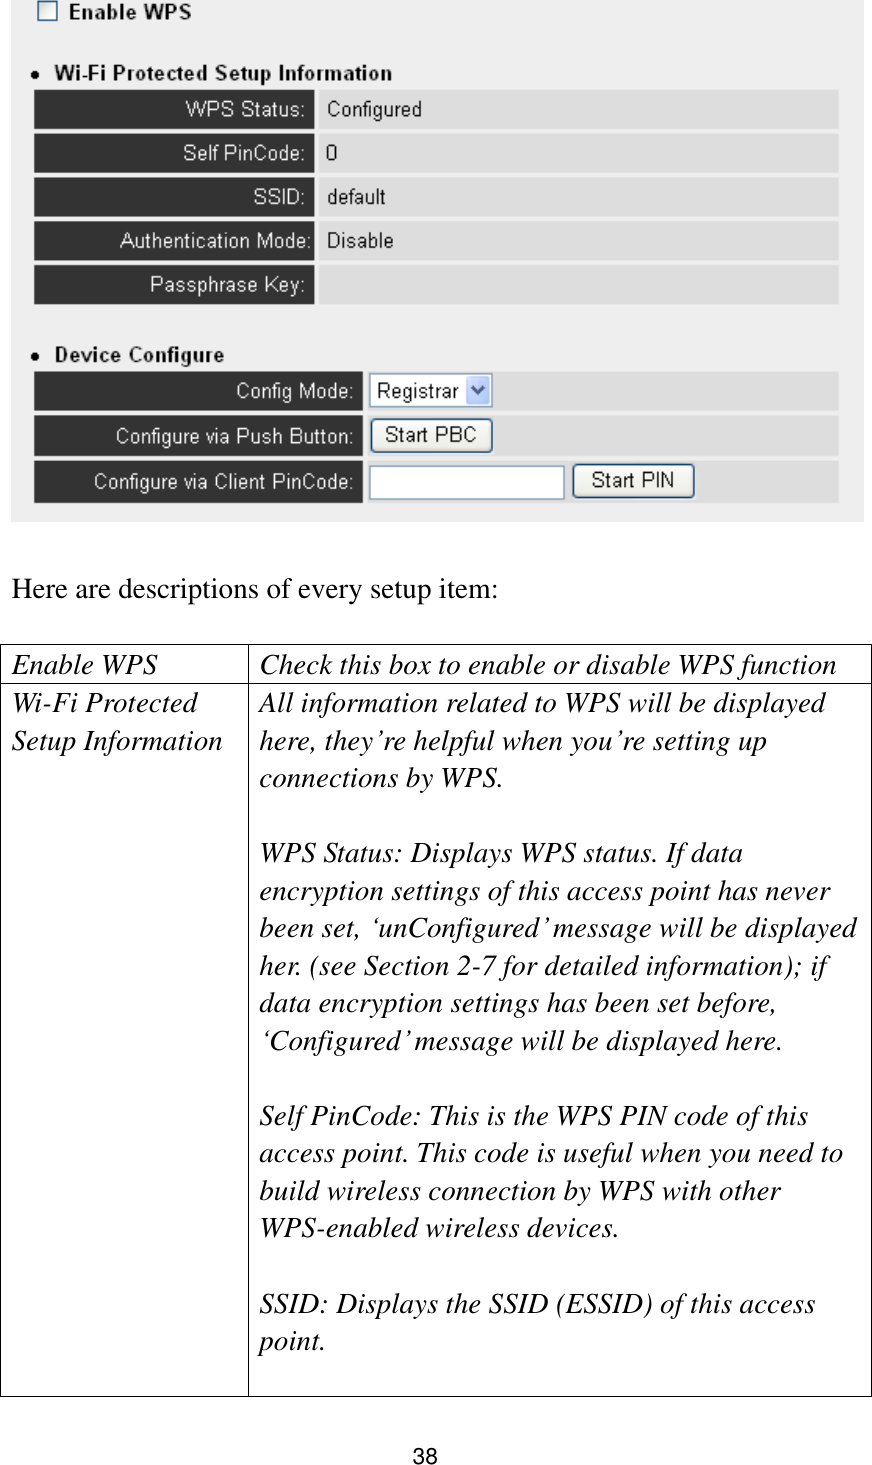 38   Here are descriptions of every setup item:  Enable WPS Check this box to enable or disable WPS function Wi-Fi Protected Setup Information All information related to WPS will be displayed here, they‟re helpful when you‟re setting up connections by WPS.  WPS Status: Displays WPS status. If data encryption settings of this access point has never been set, „unConfigured‟ message will be displayed her. (see Section 2-7 for detailed information); if data encryption settings has been set before, „Configured‟ message will be displayed here.    Self PinCode: This is the WPS PIN code of this access point. This code is useful when you need to build wireless connection by WPS with other WPS-enabled wireless devices.  SSID: Displays the SSID (ESSID) of this access point.  